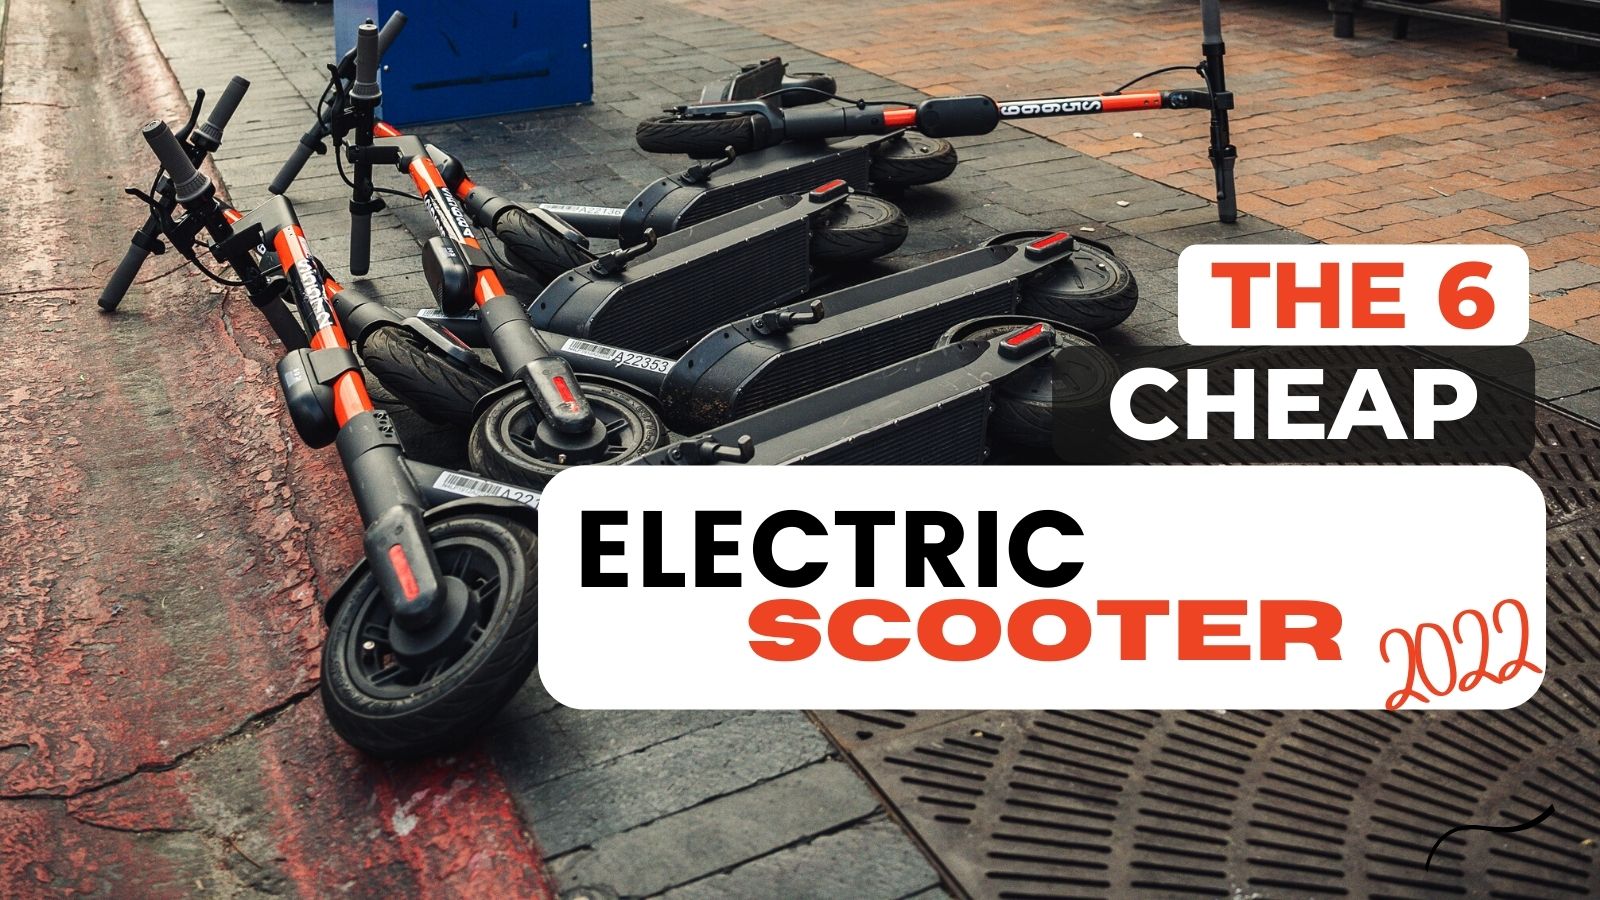 CHEAP ELECTRIC SCOOTER